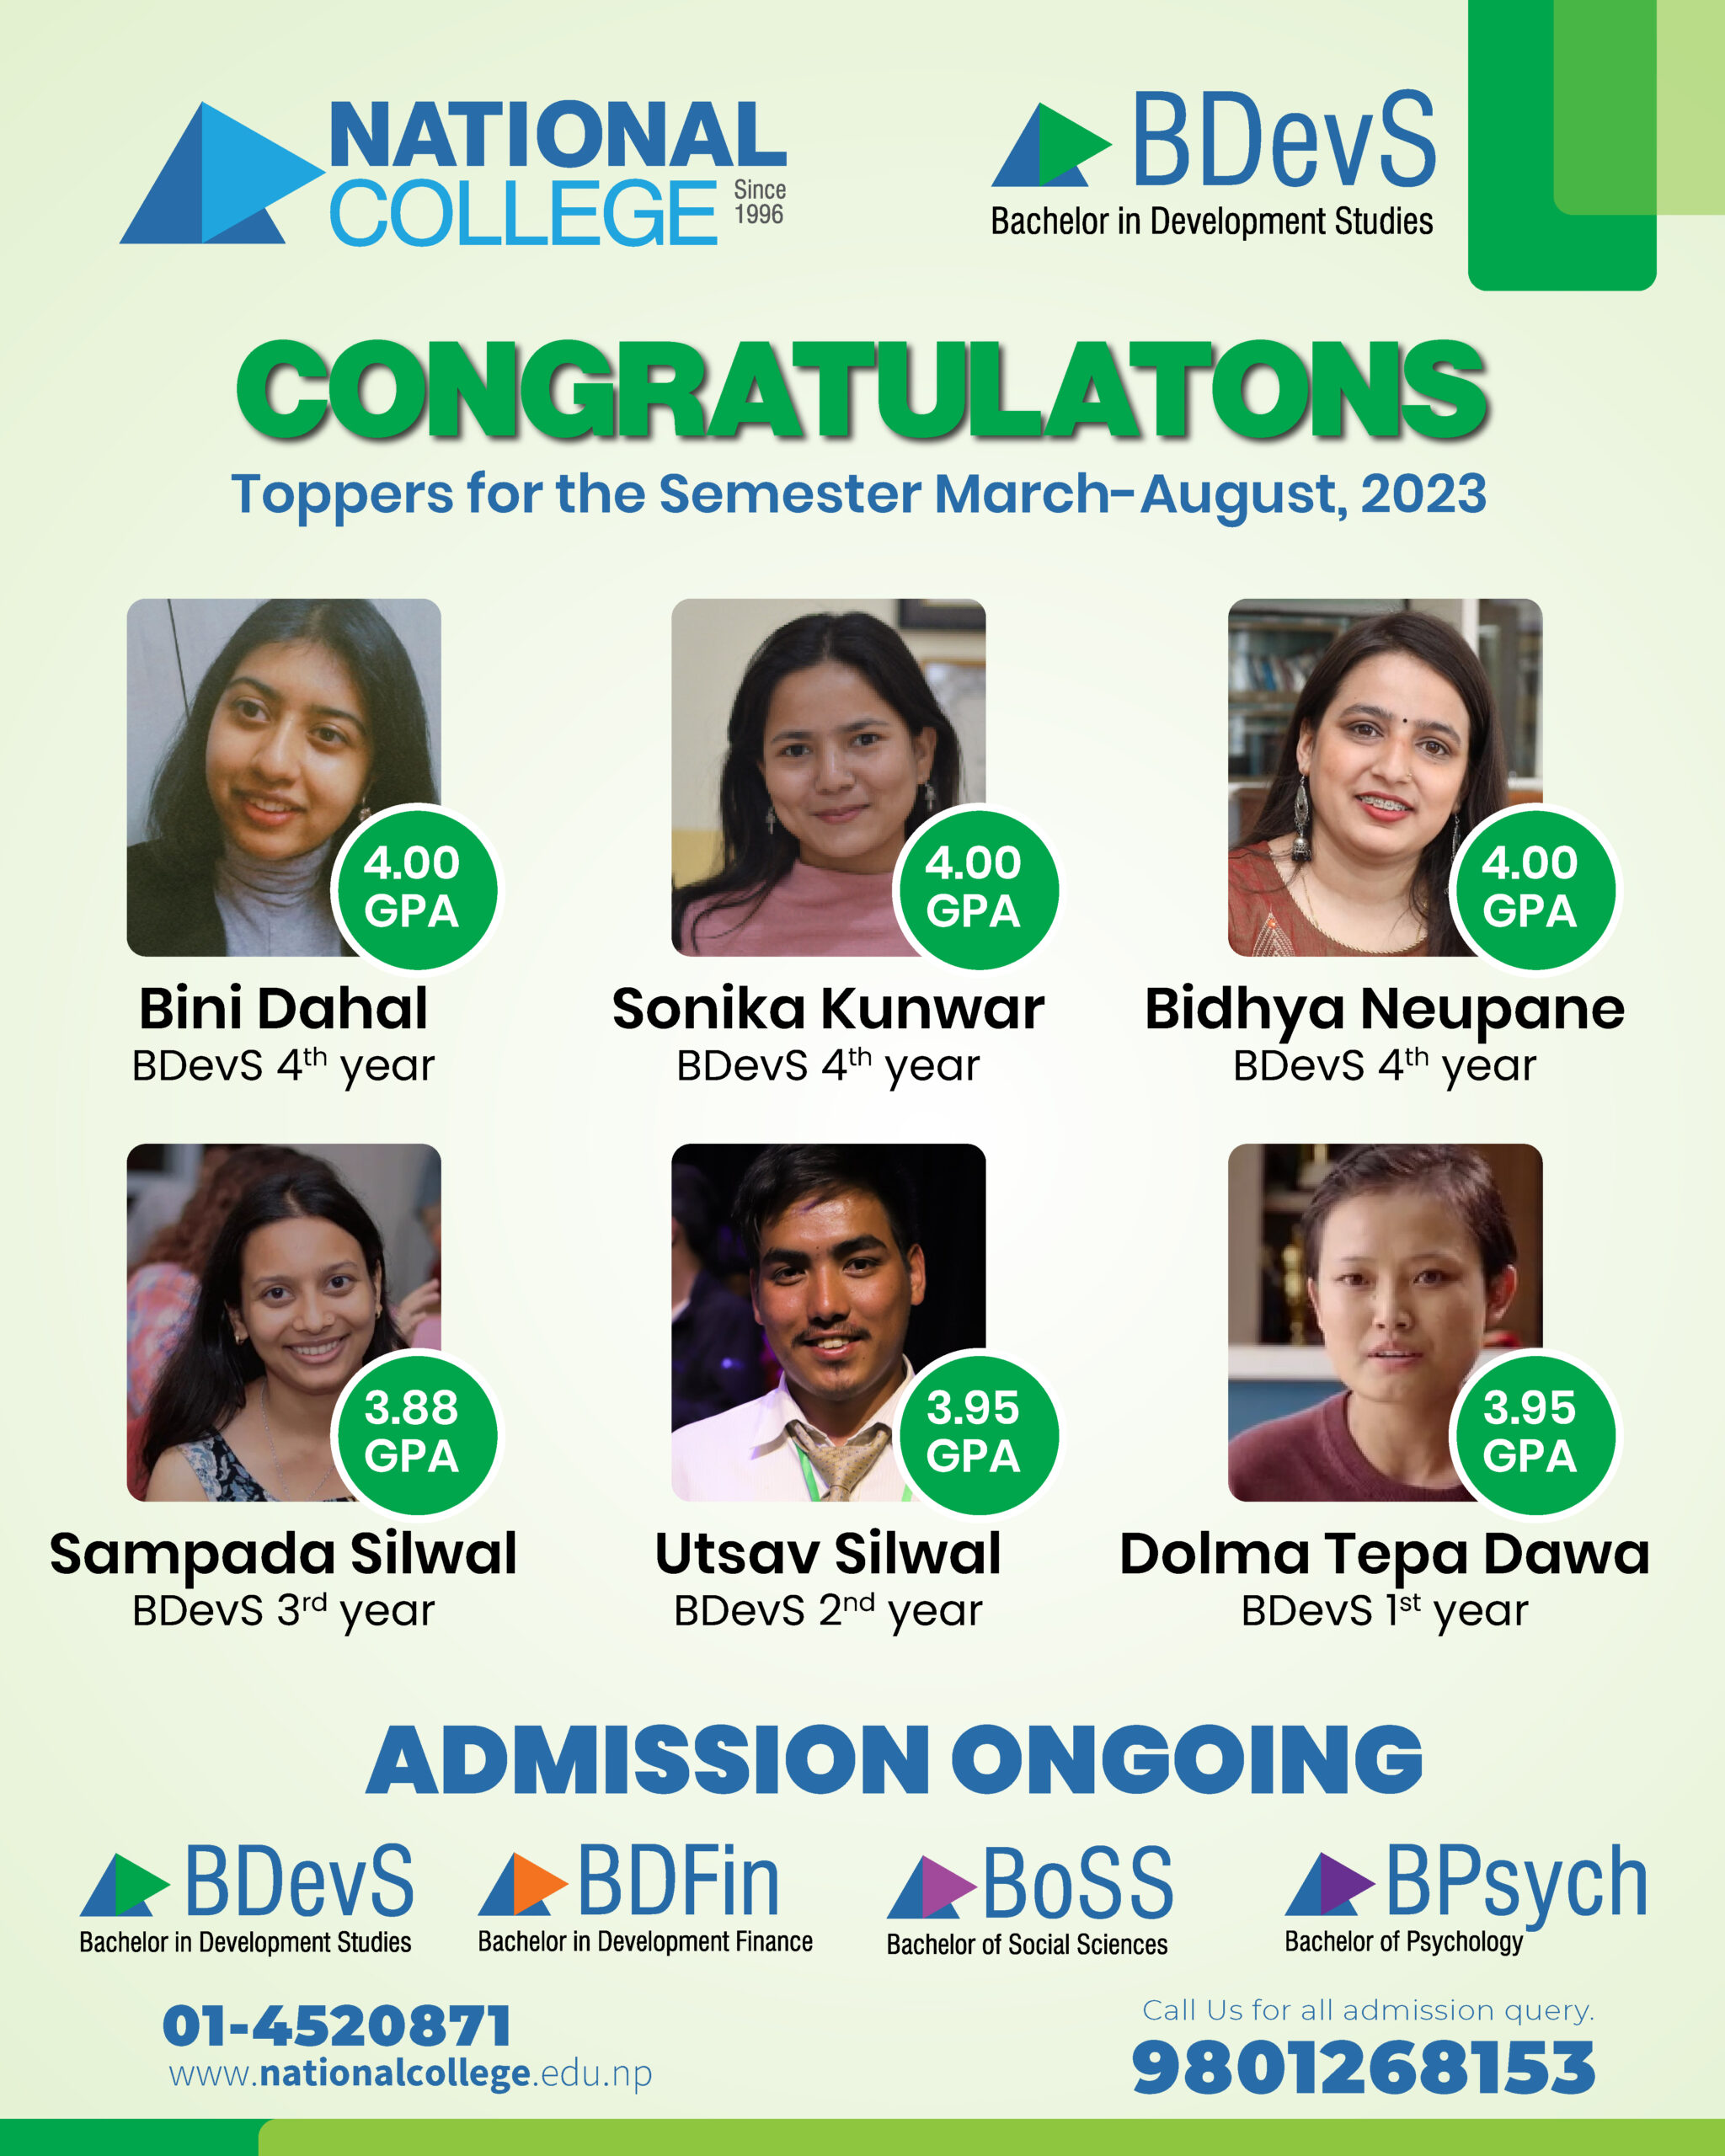 CONGRATULATONS Toppers for the Semester March-August, 2023 #BDevS